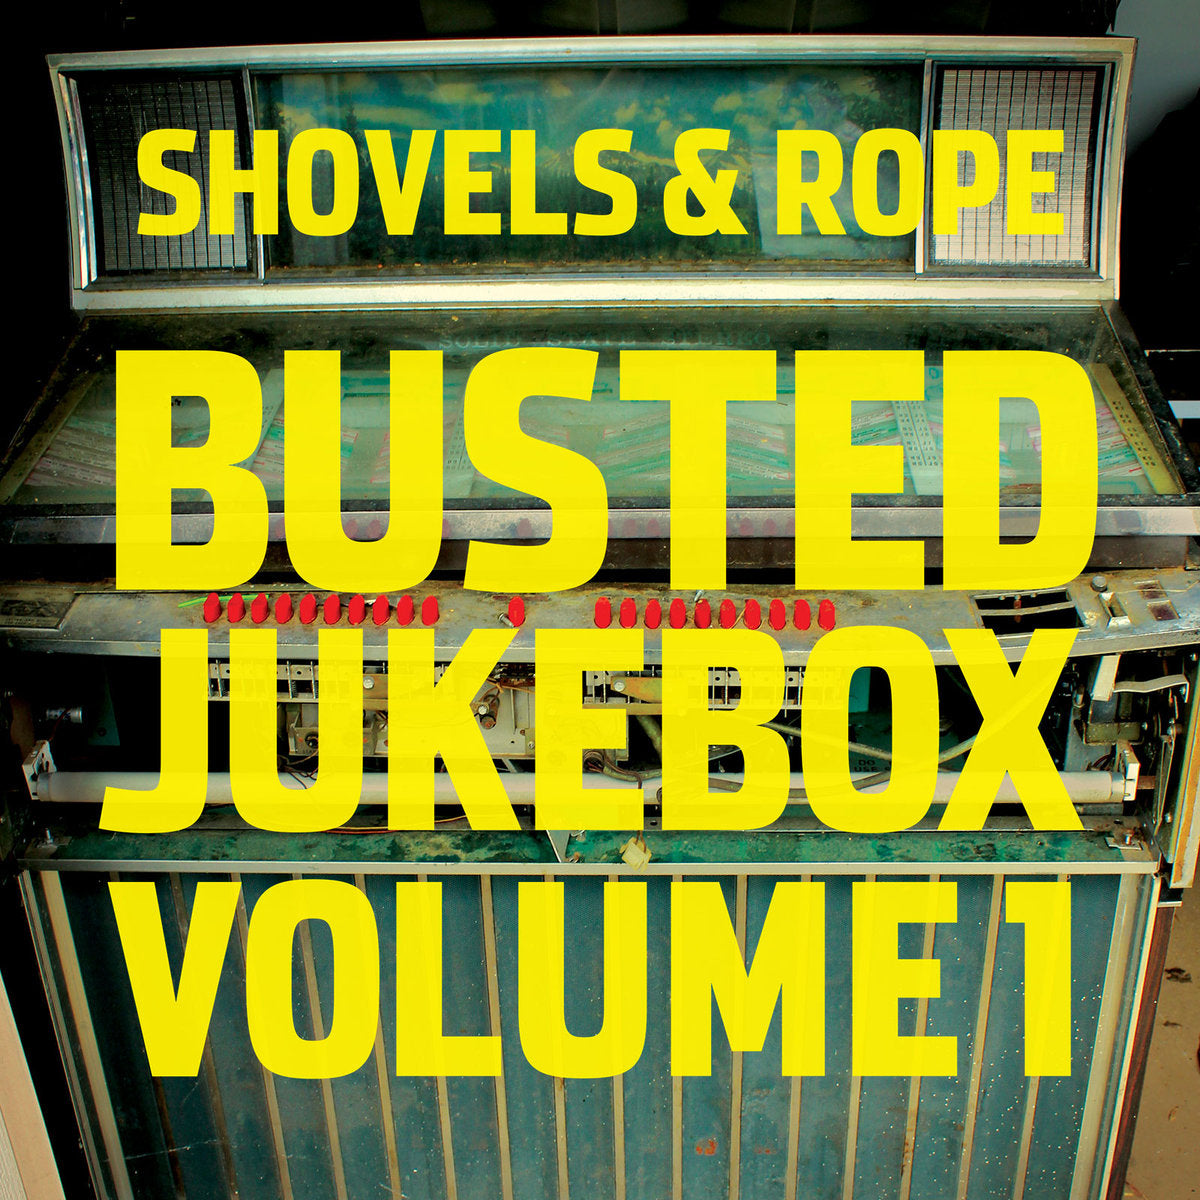 Shovels and Rope - Busted Jukebox Volume 1